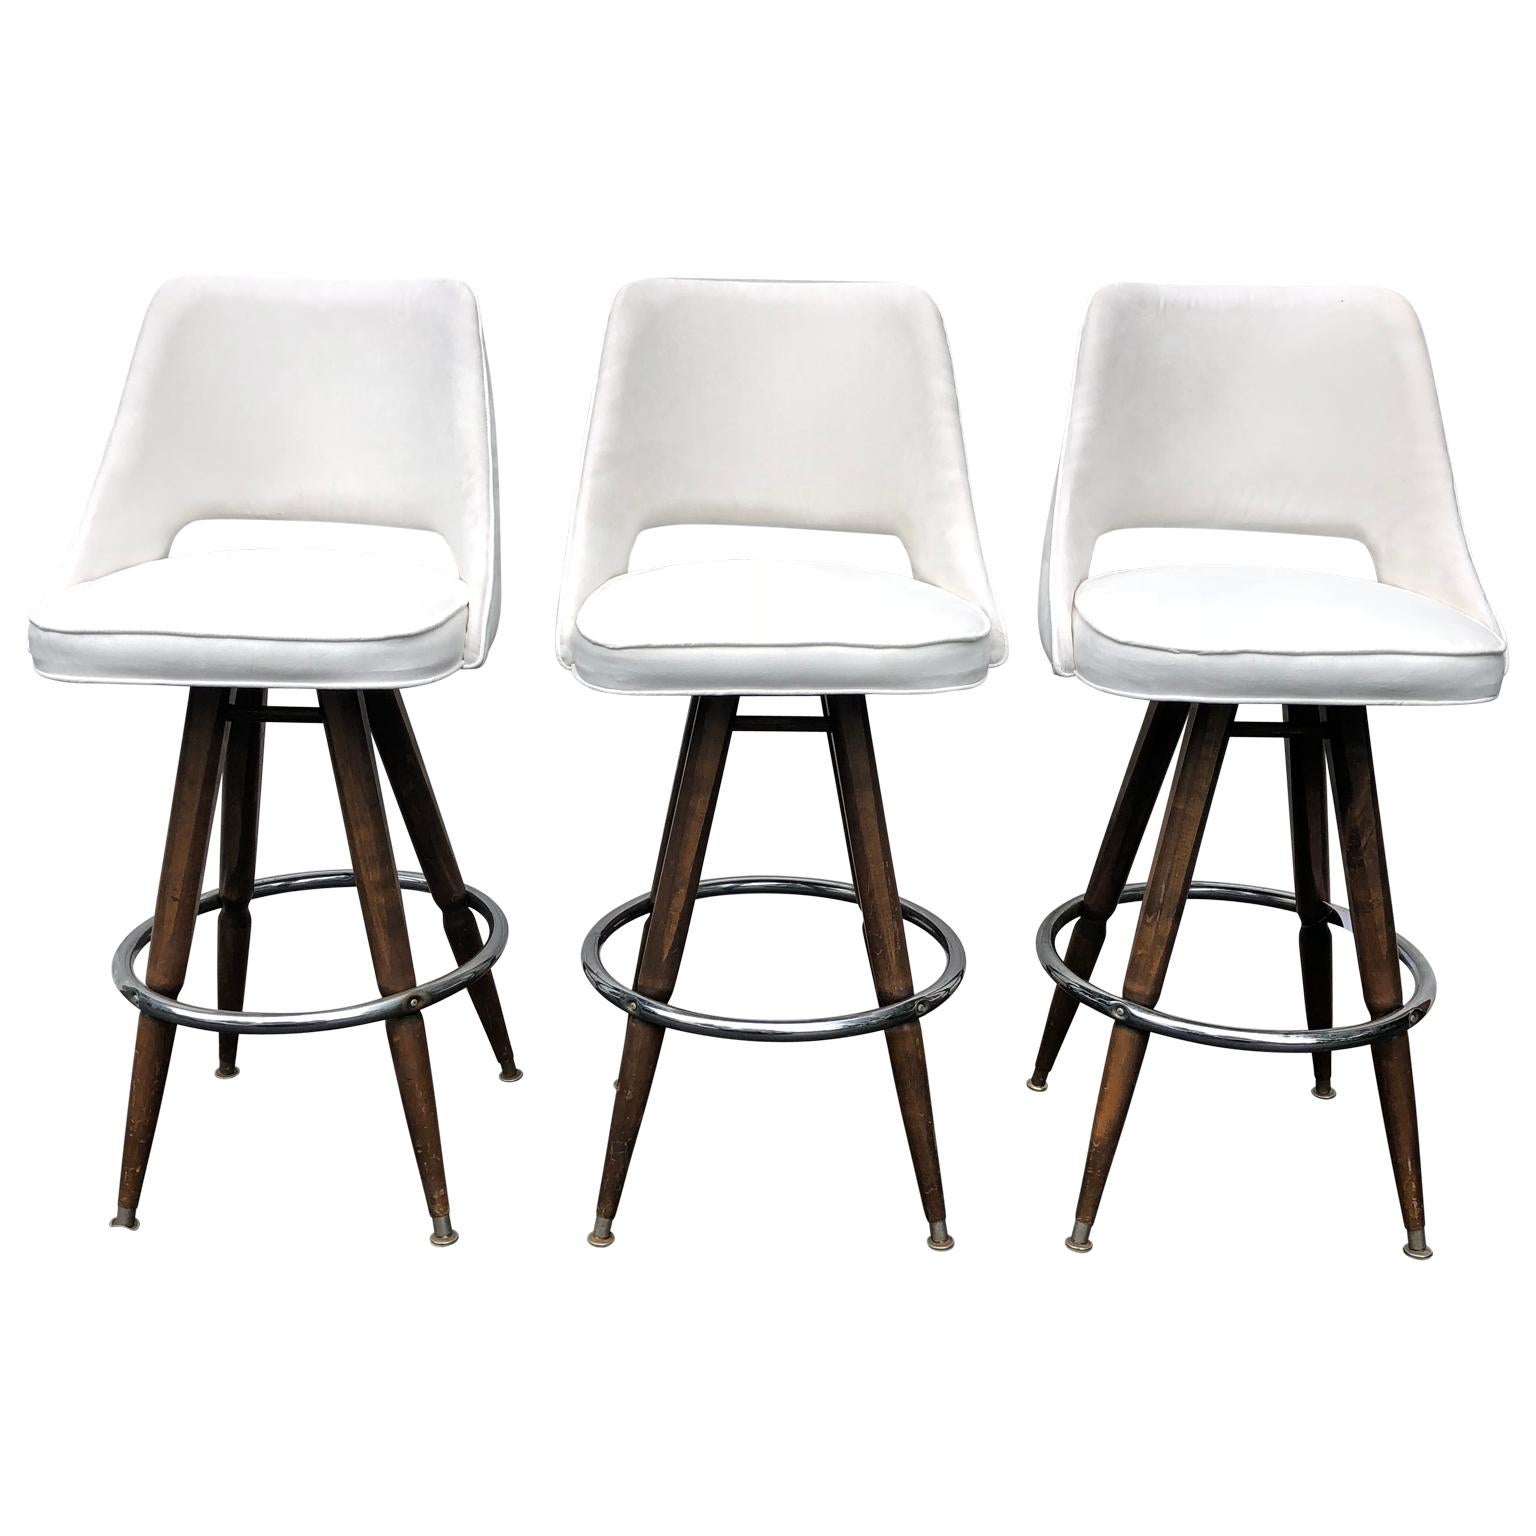 Set of three mid-century white faux-suede bar stools

3 large sturdy bar stool on wooden and chrome legs and with upholstery in white spill-proof faux suede.